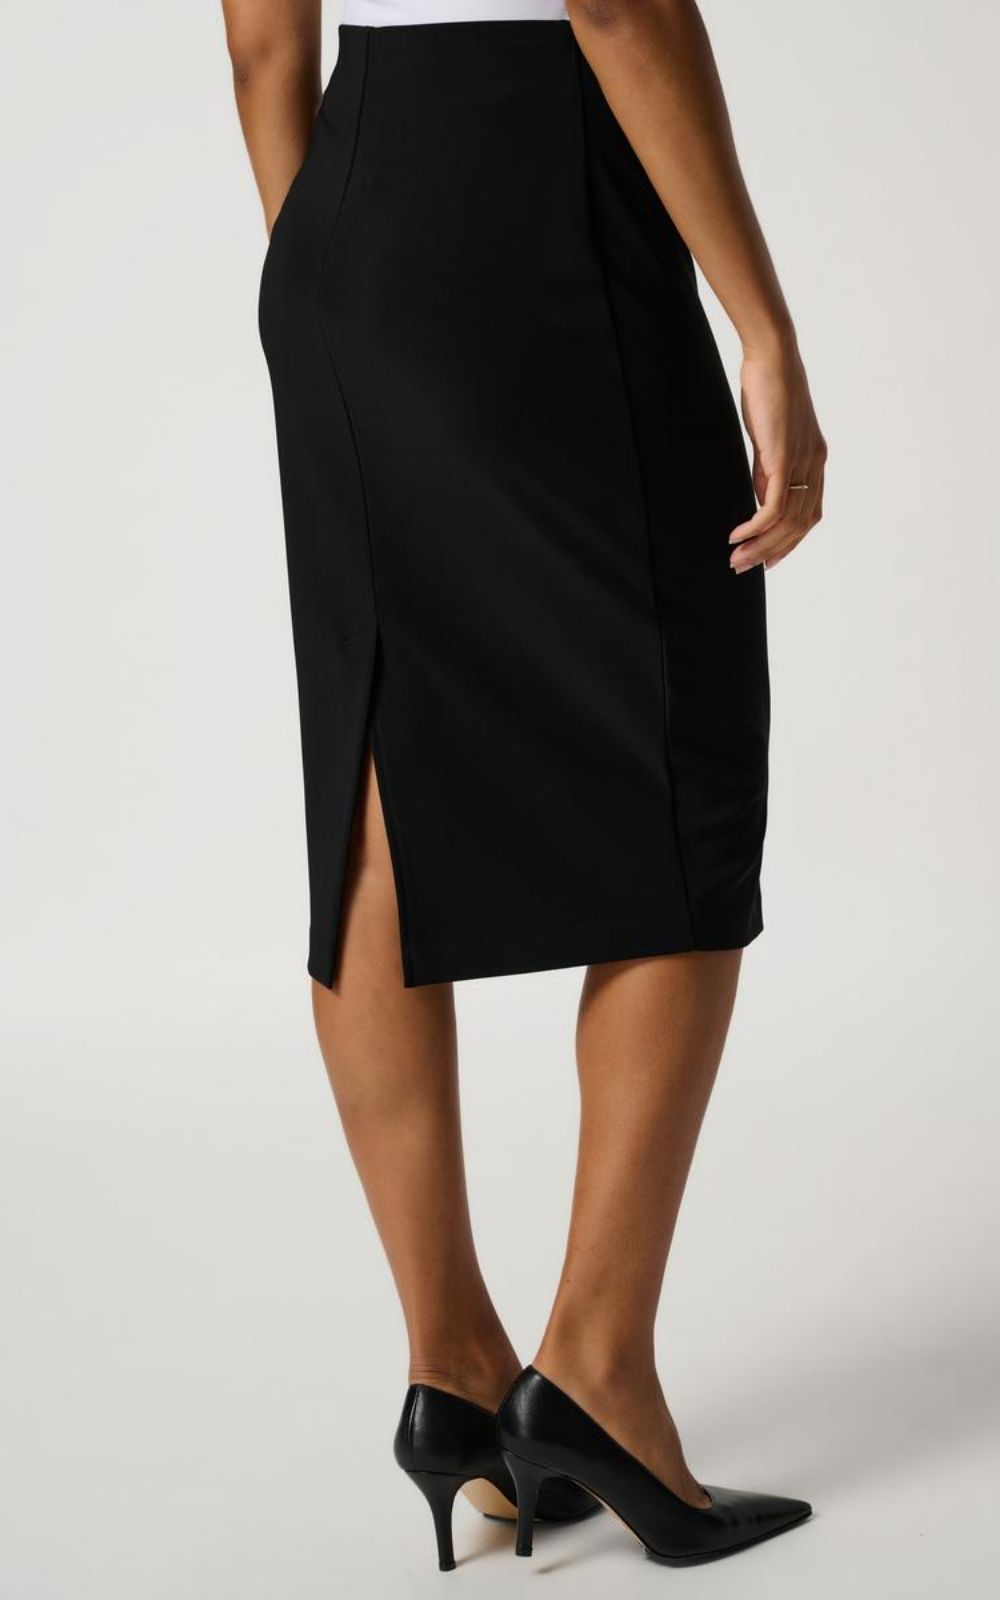 Work It Out Pencil Skirt product photo.